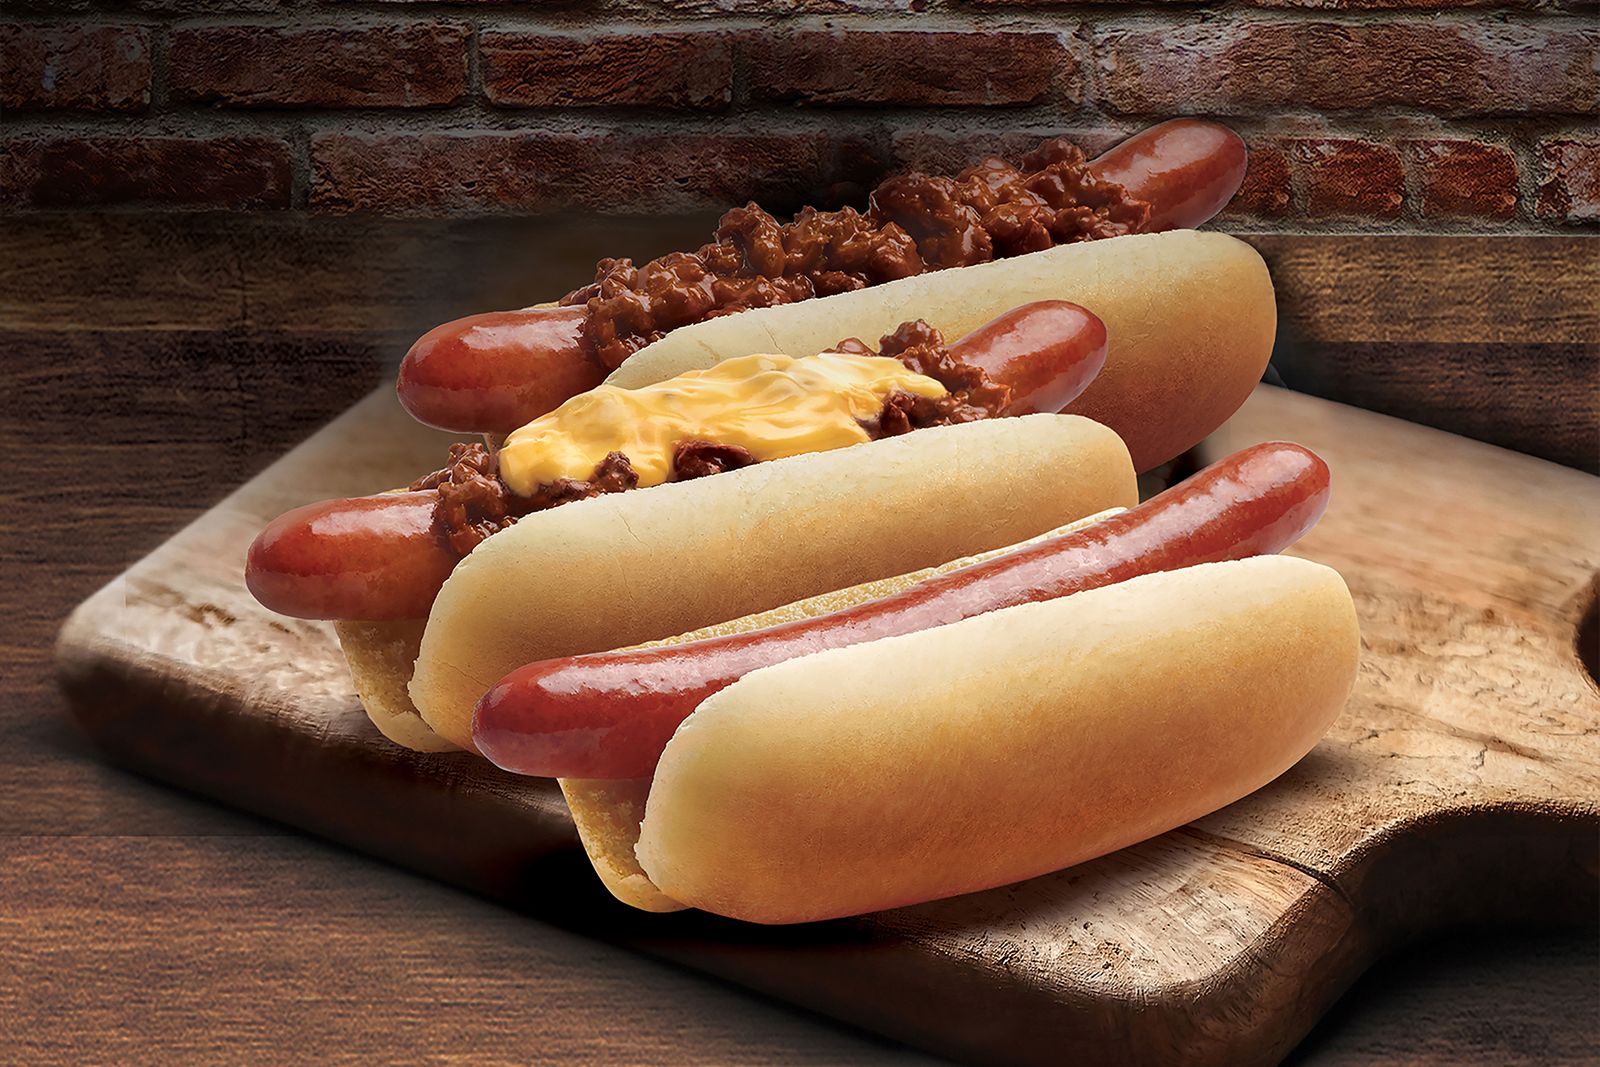 Frisch's Big Boy To Serve Nathan's Famous Hot Dogs at All Locations Beginning July 1